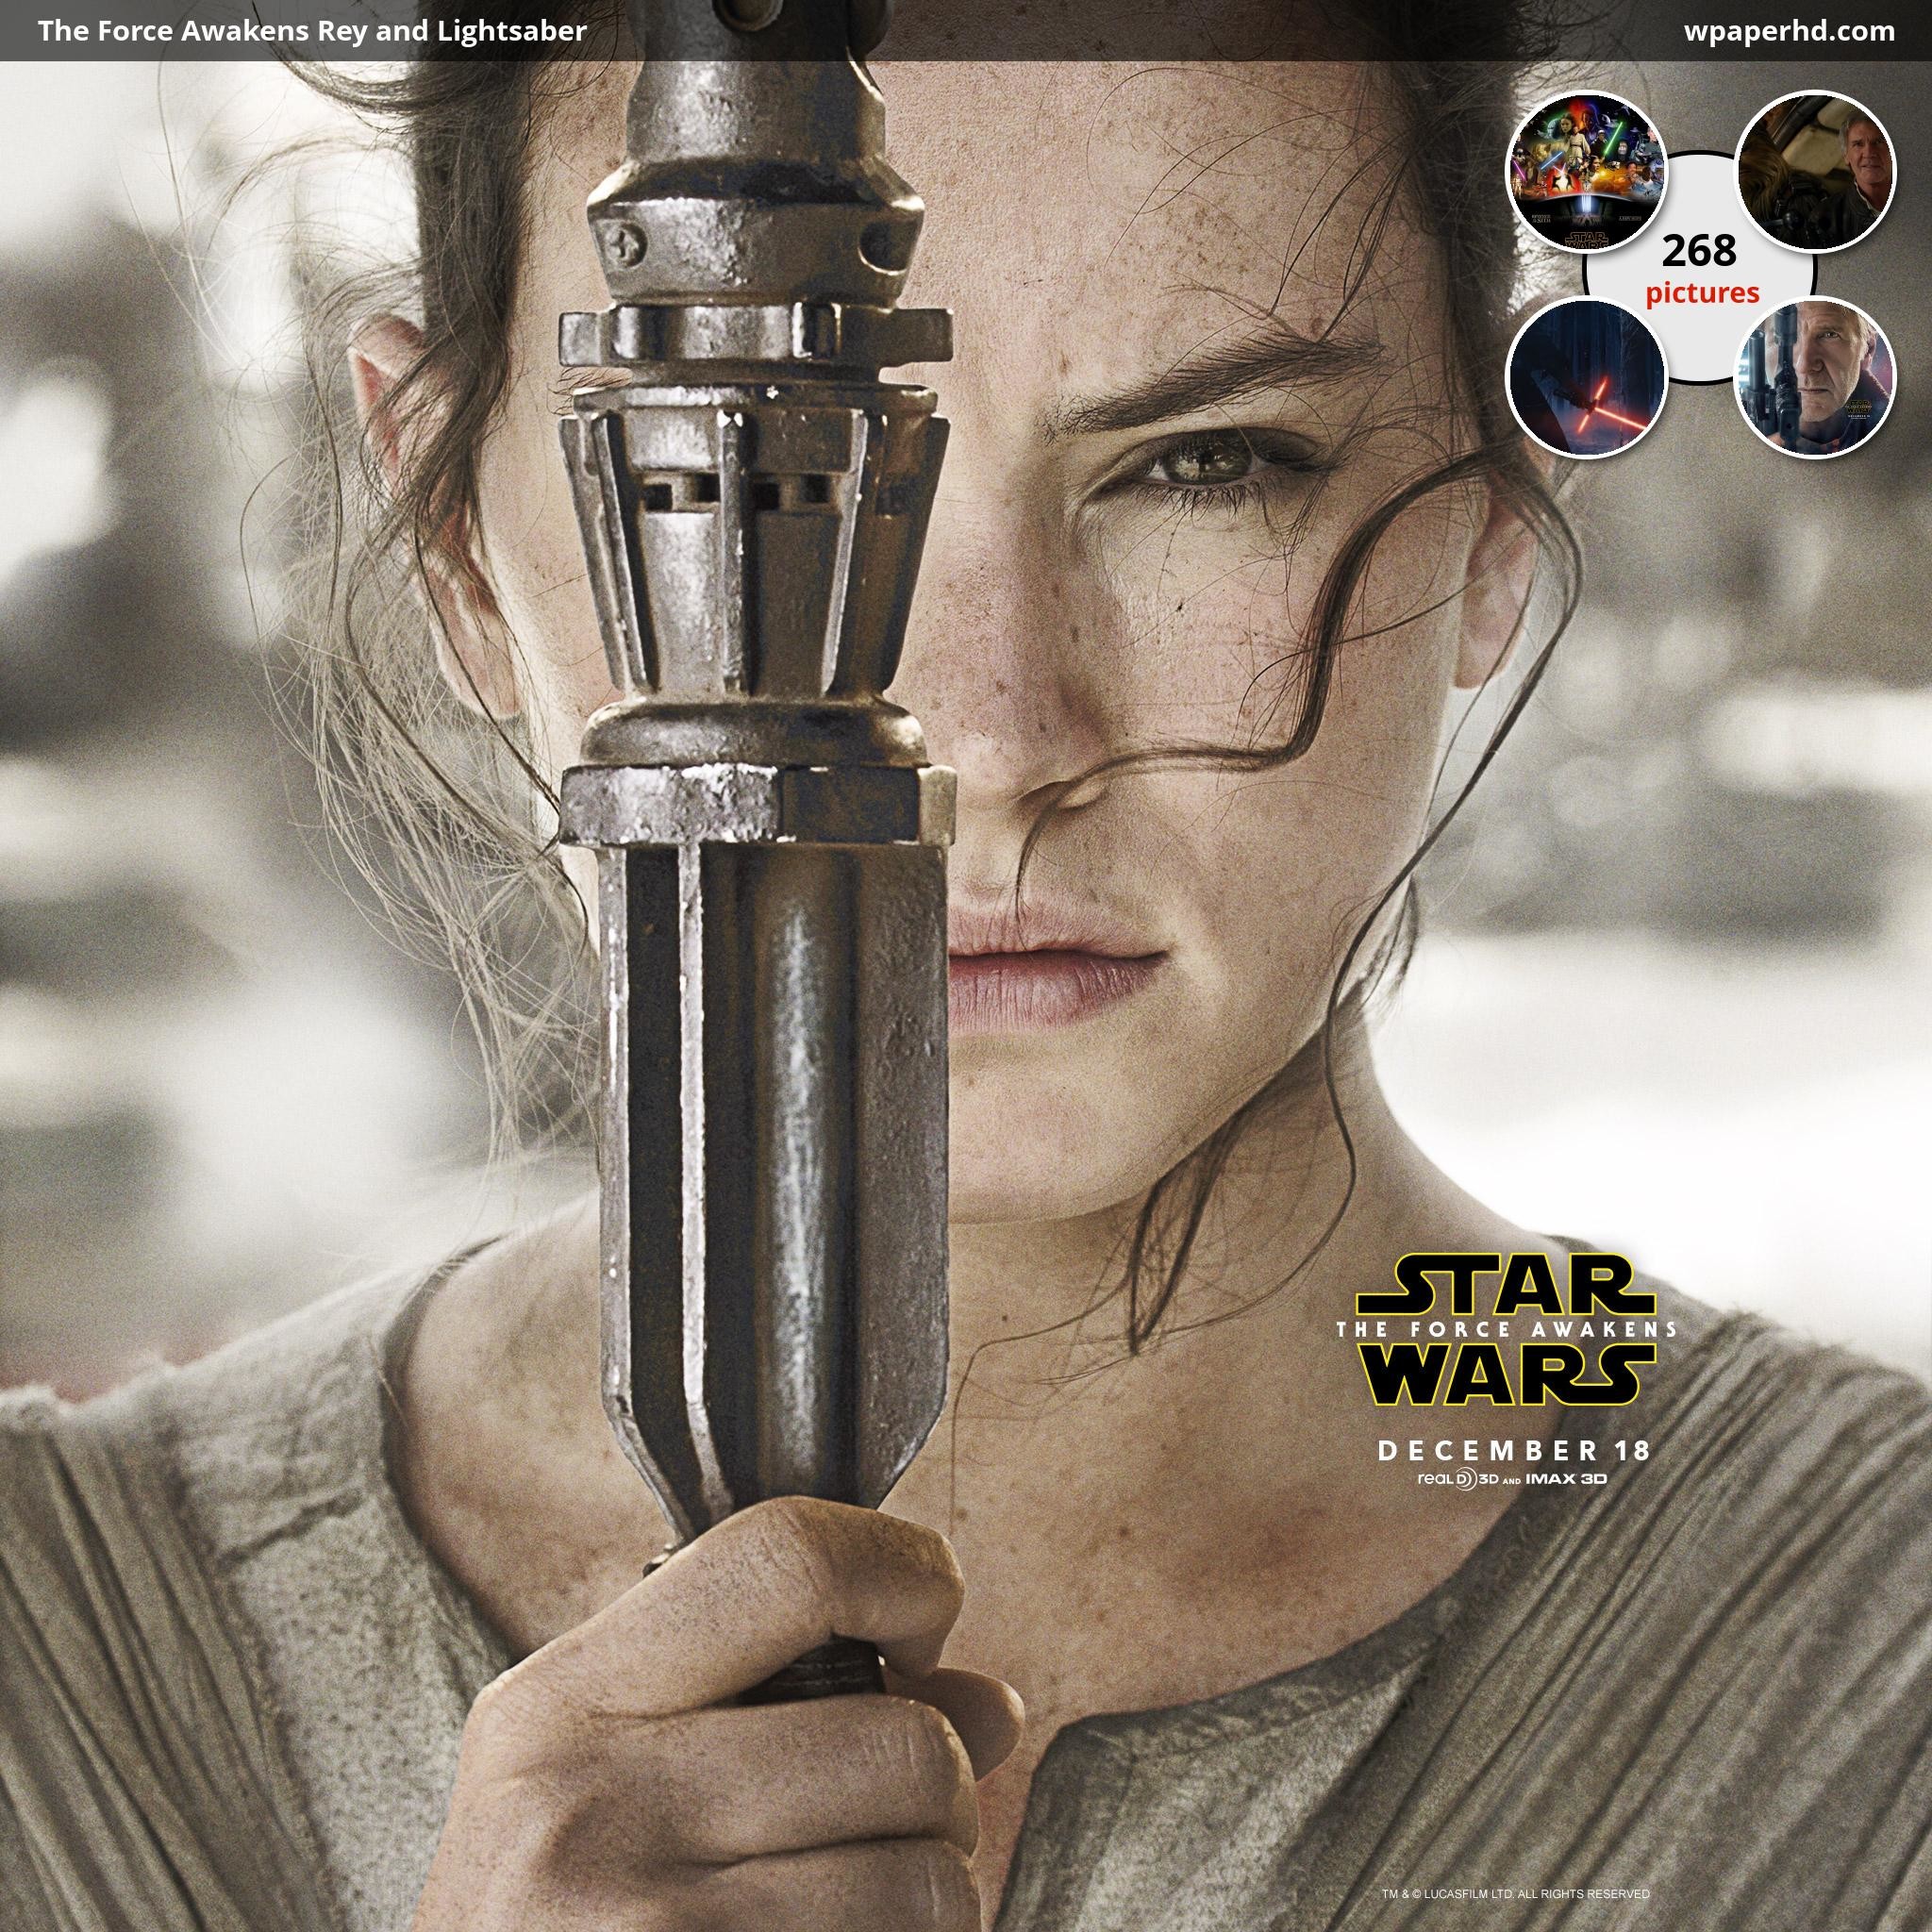 2048x2048 You are on page with The Force Awakens Rey and Lightsaber wallpaper, where  you can download this picture in Original size and ...